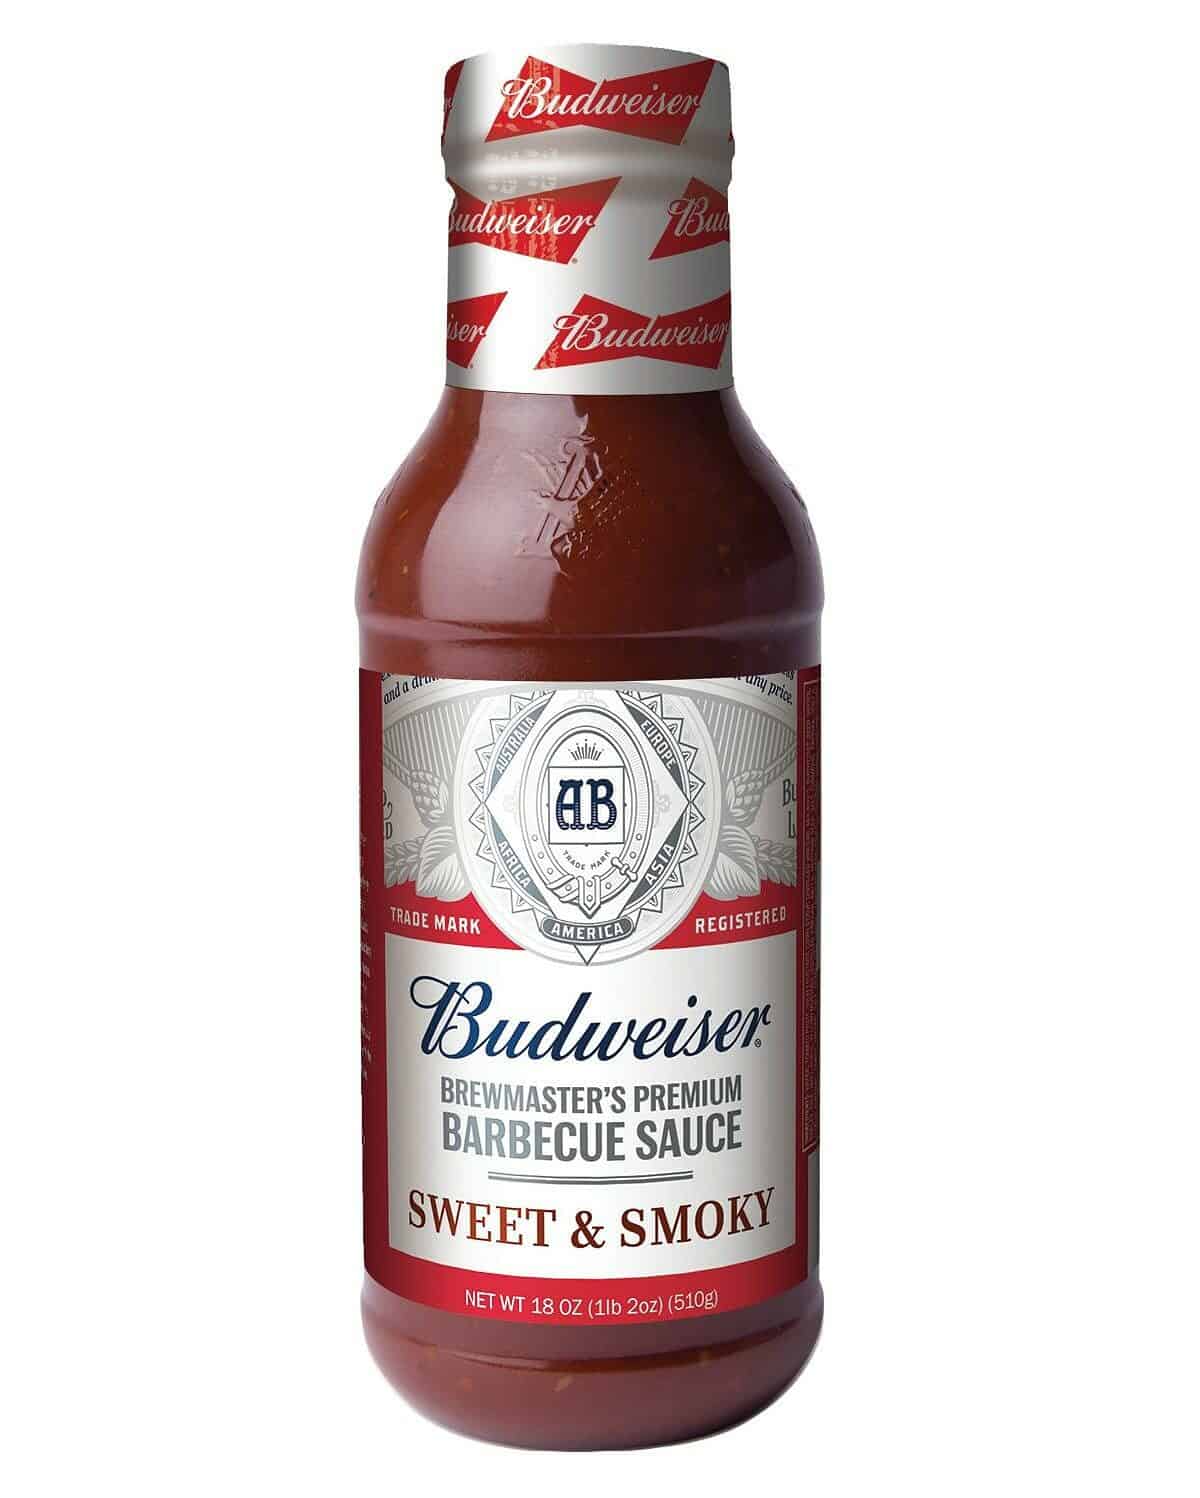  A bottle of Budweiser for the sauce, another for the chef!